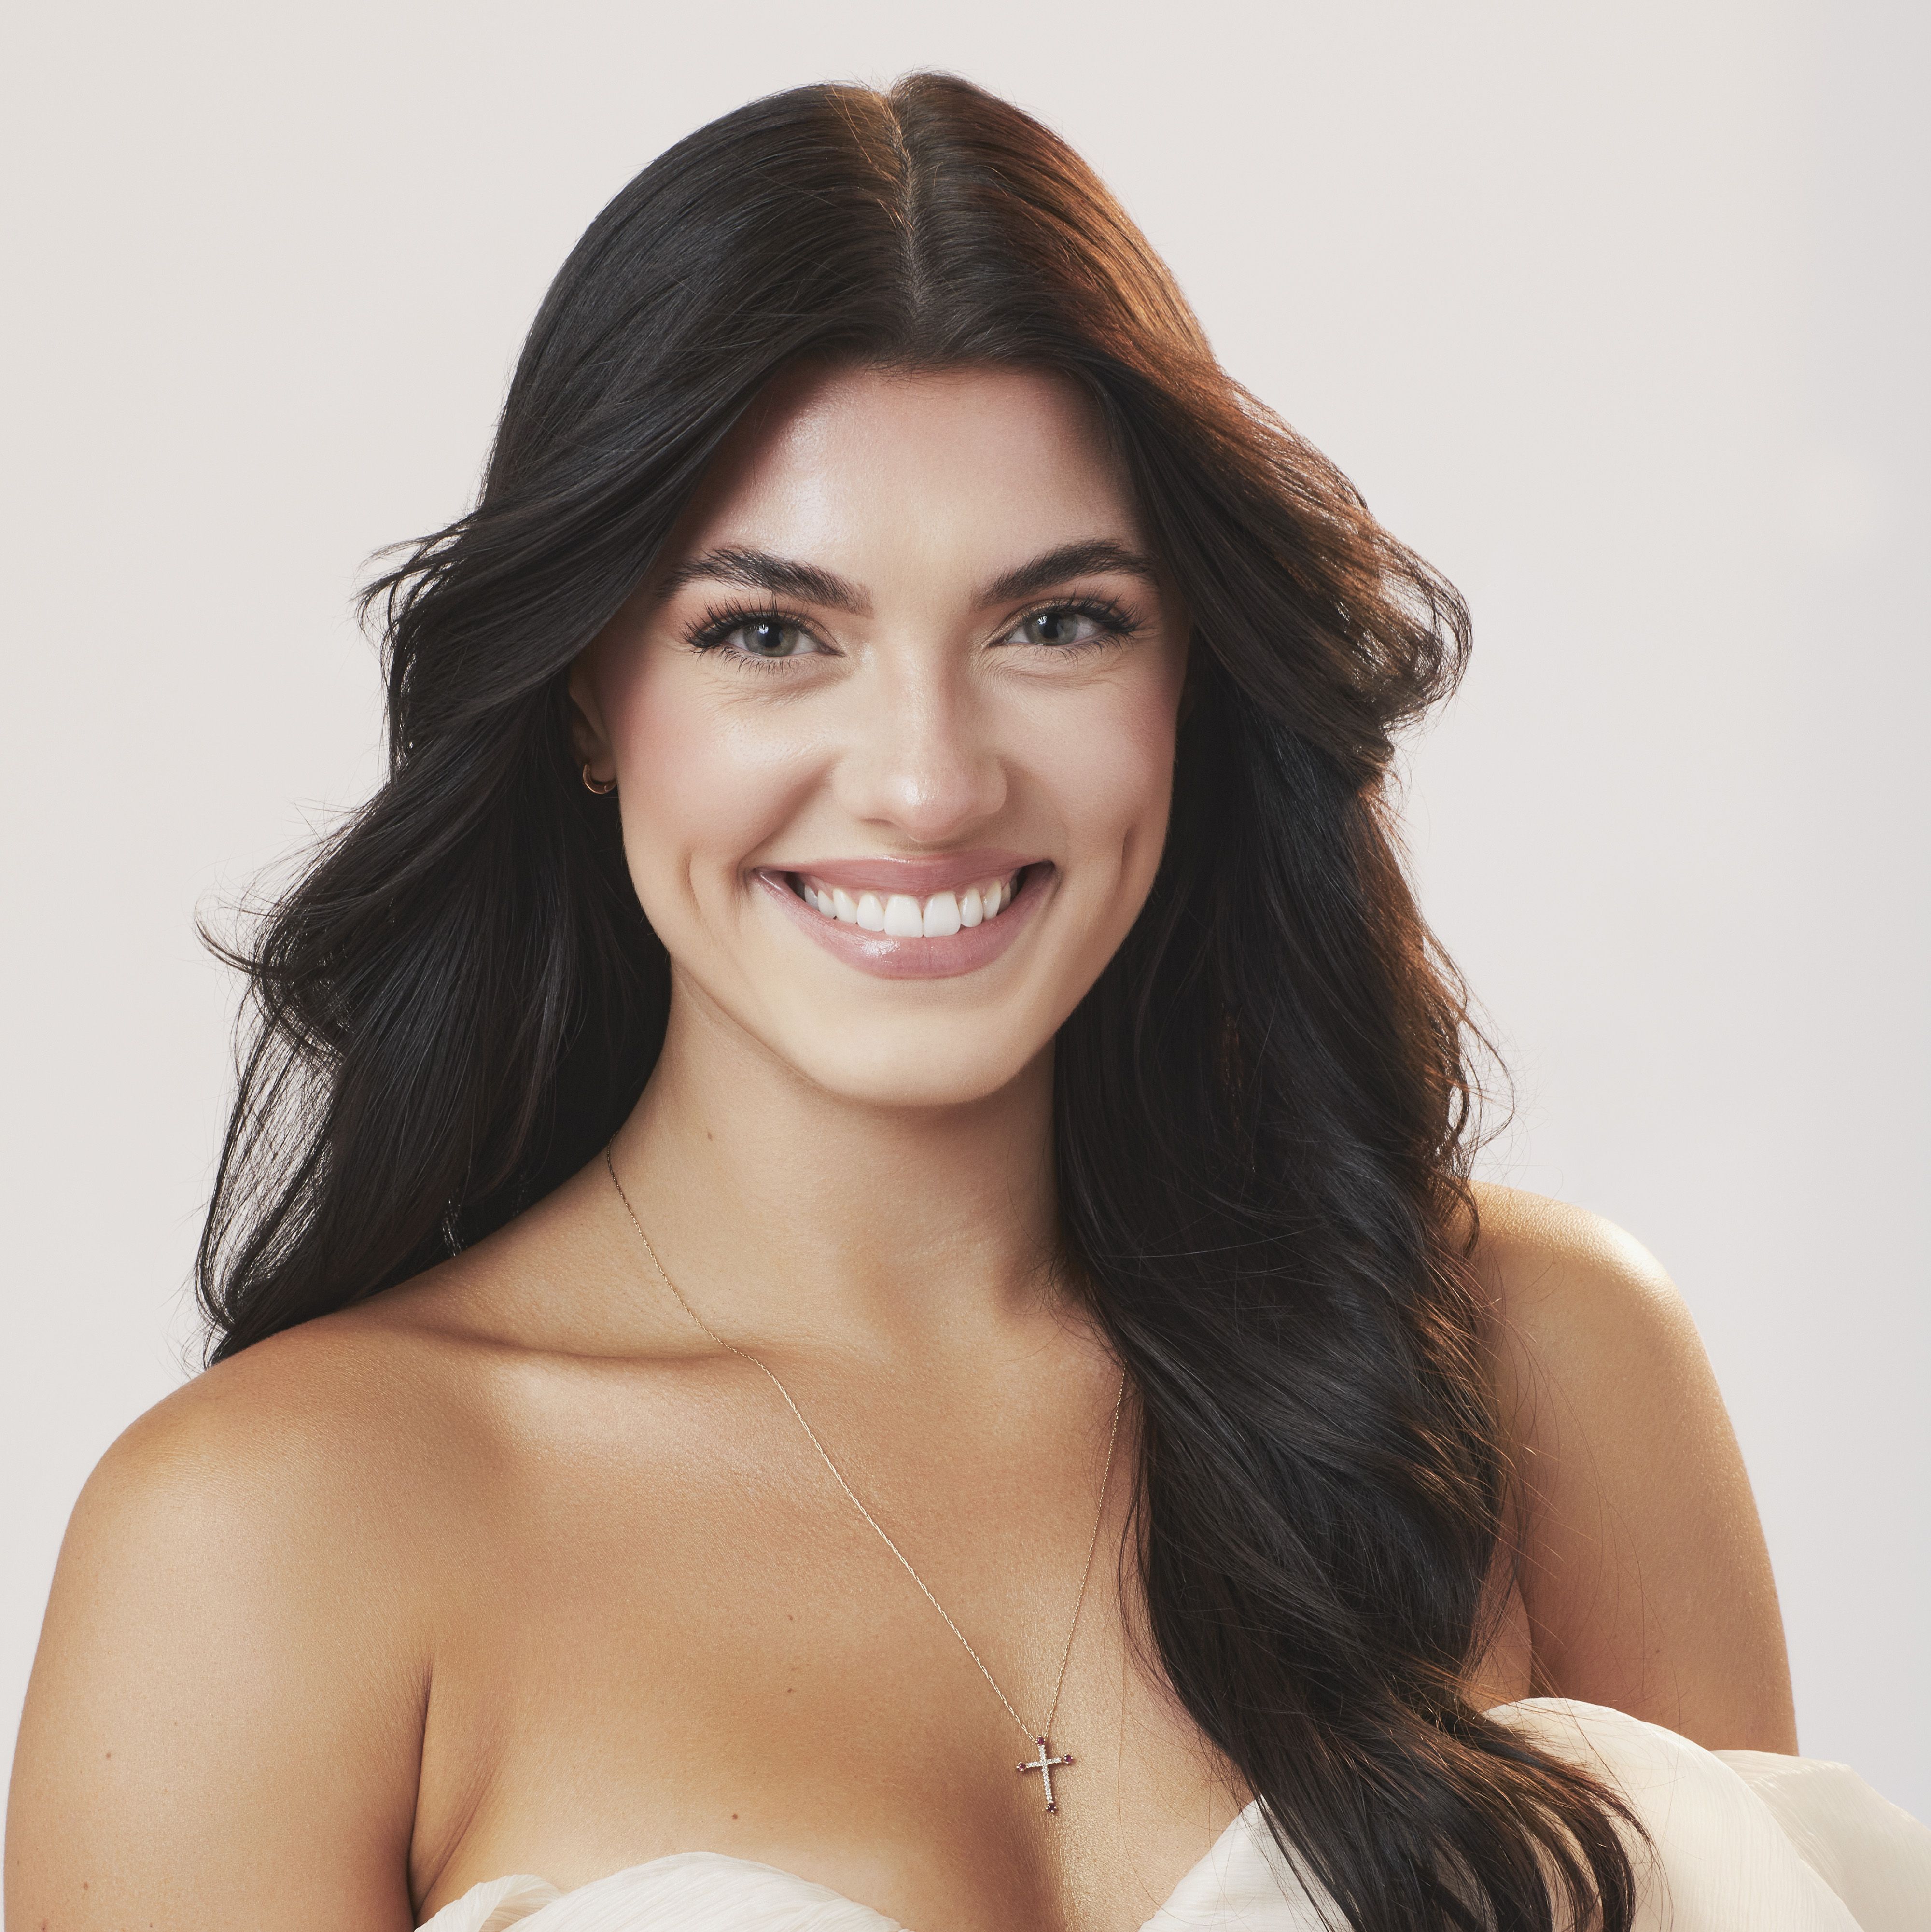 Everything We Know About 'Bachelor' Contestant Gabi Elnicki—Including a Ton of Dramatic Spoilers